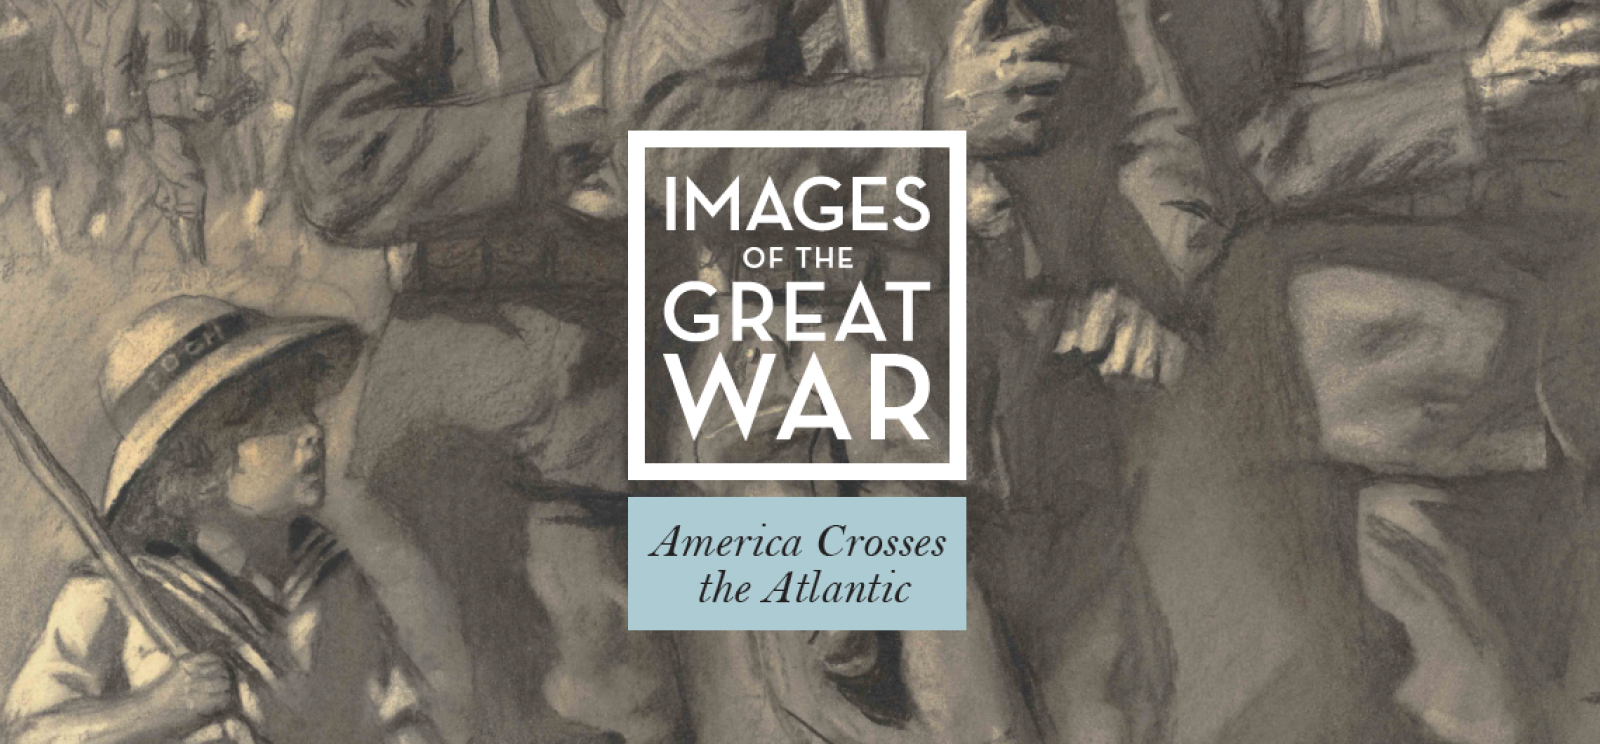 Background image: crop of a sketch depicting soldiers marching forward, followed by a child in a straw hat. Foreground text: Images of the Great War / America Crosses the Atlantic